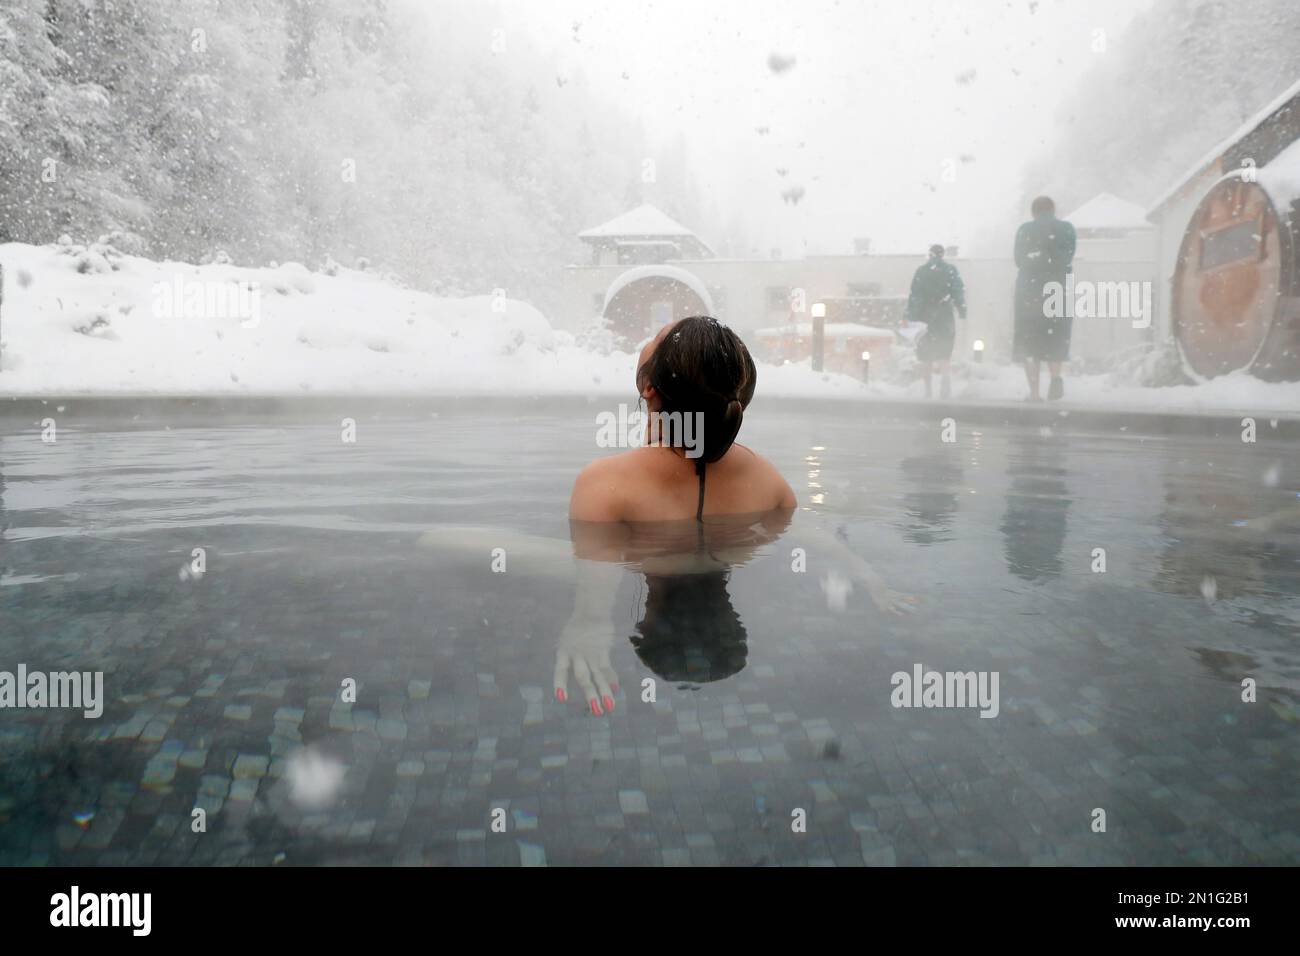 Saint-Gervais Mont-Blanc thermal spa, woman enjoying spa and wellness treatment in winter, Haute Savoie, France, Europe Stock Photo